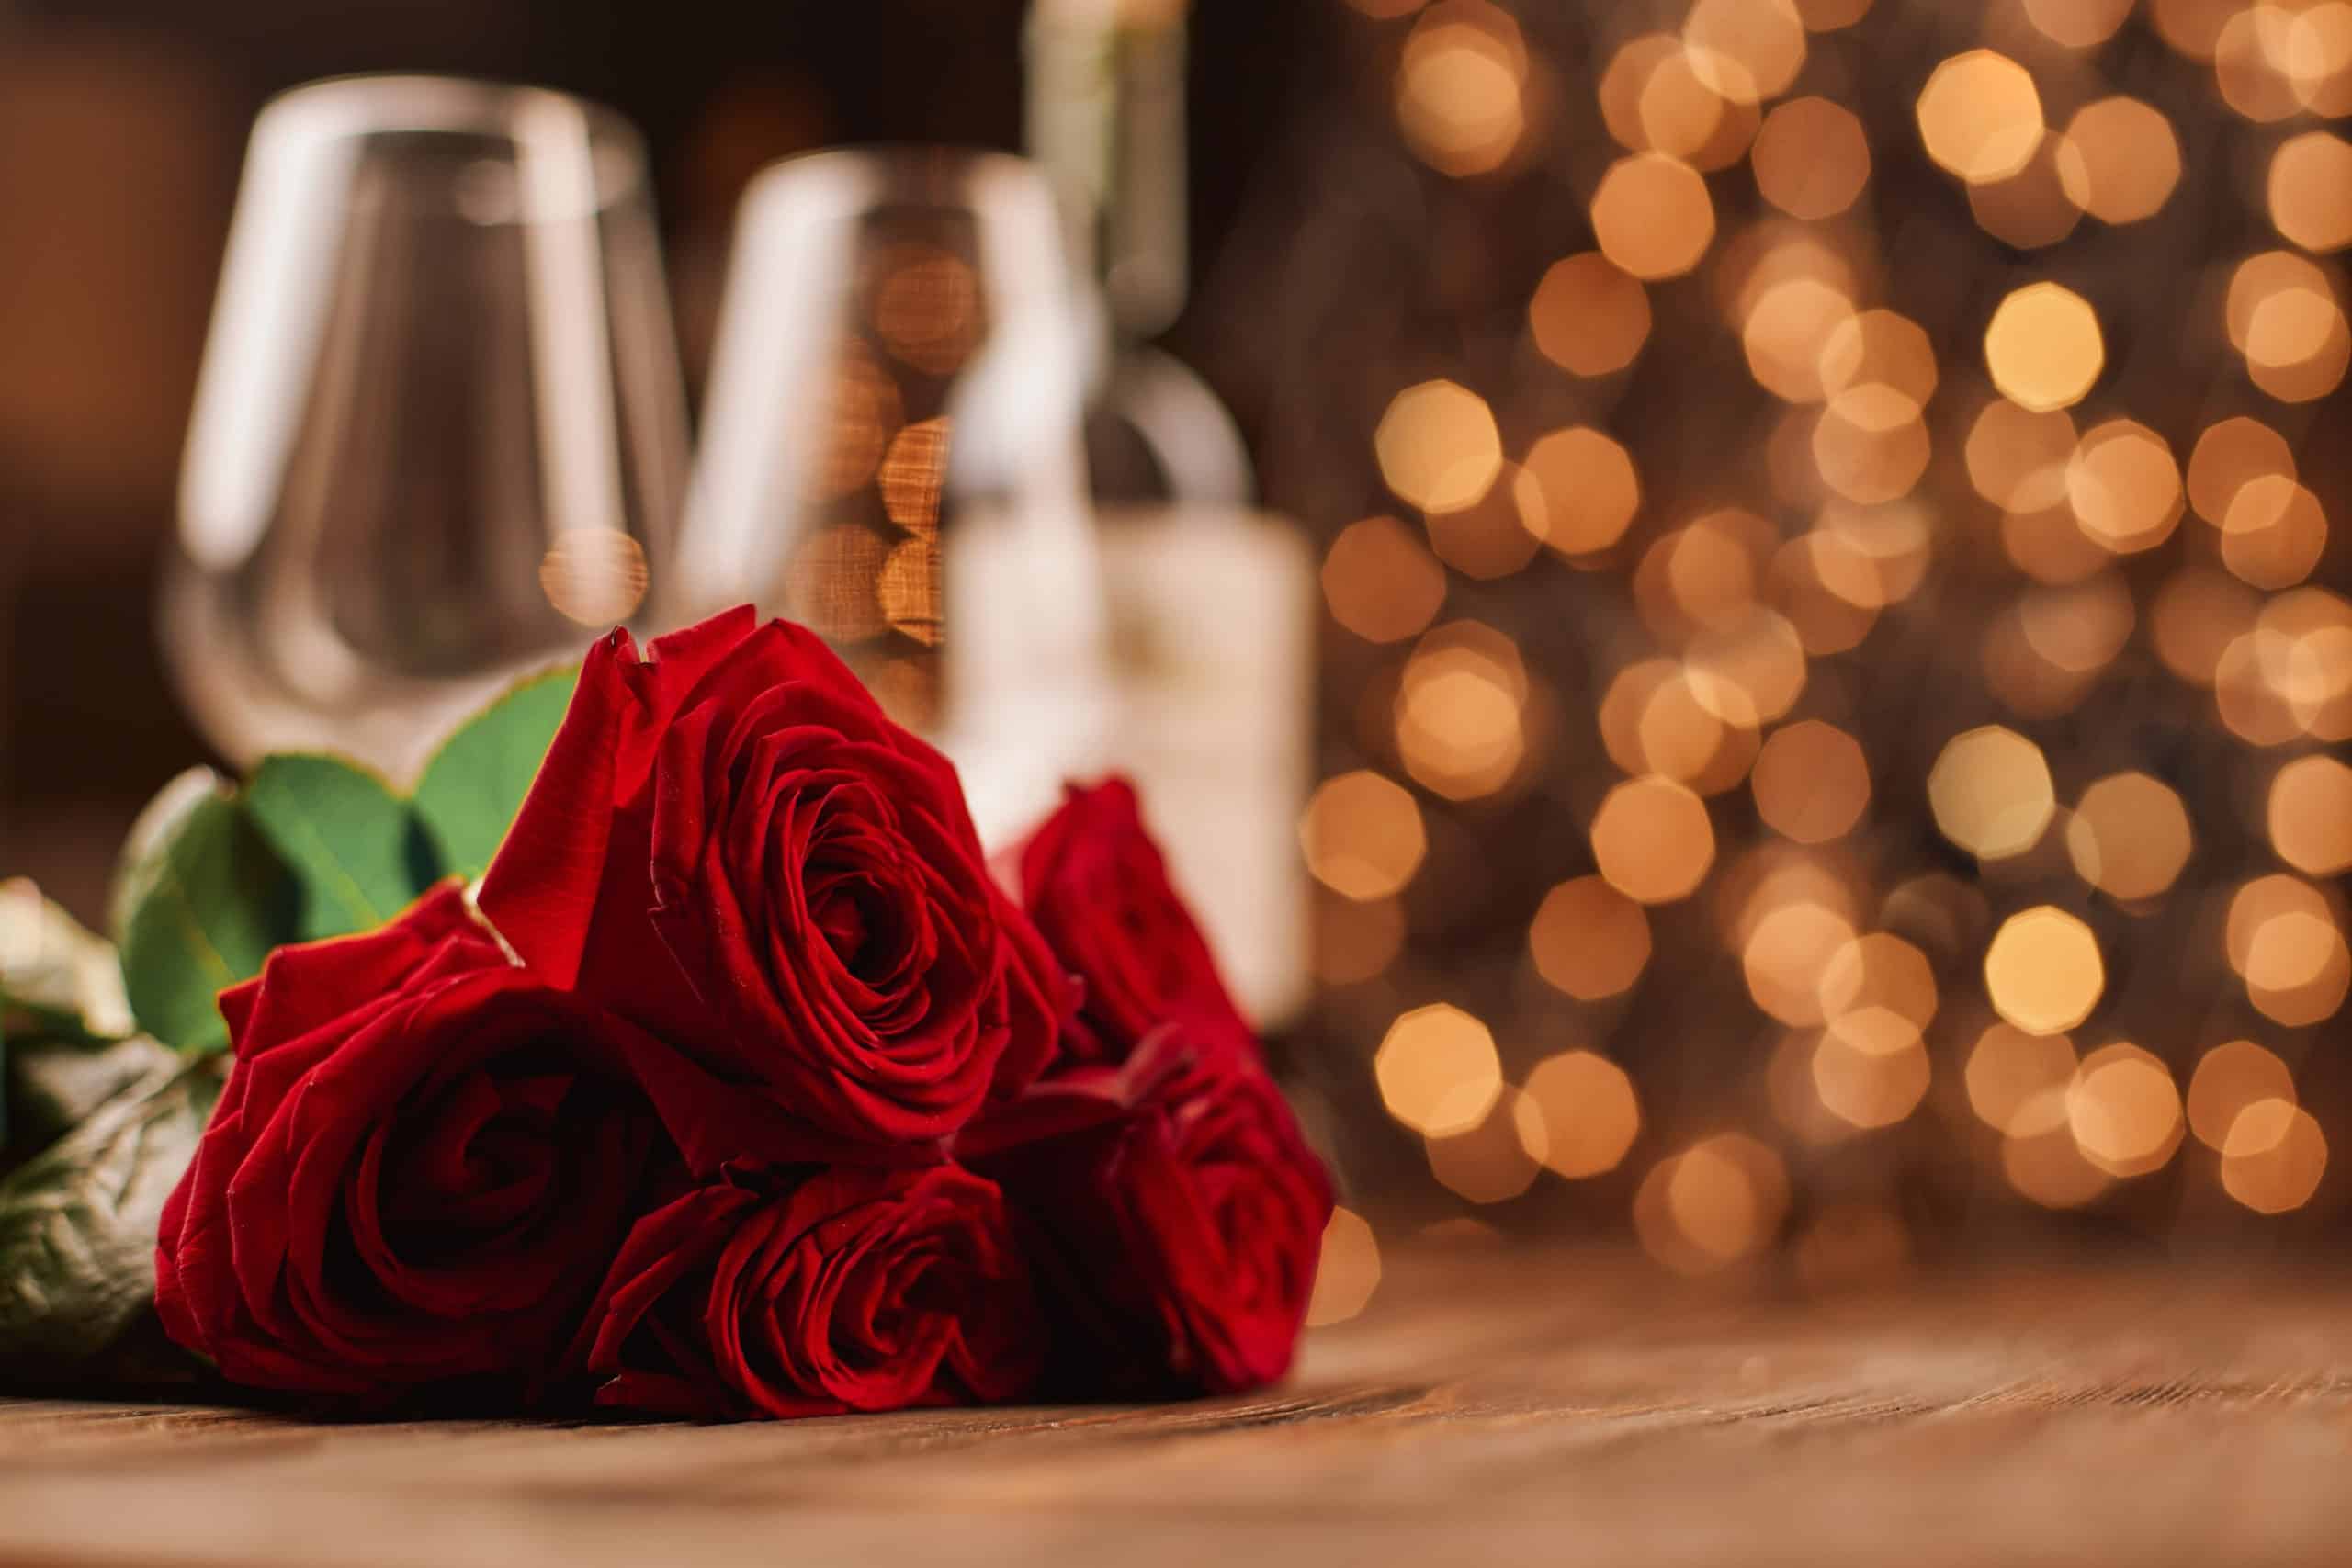 A bouquet of roses and wine glasses on a festive background.